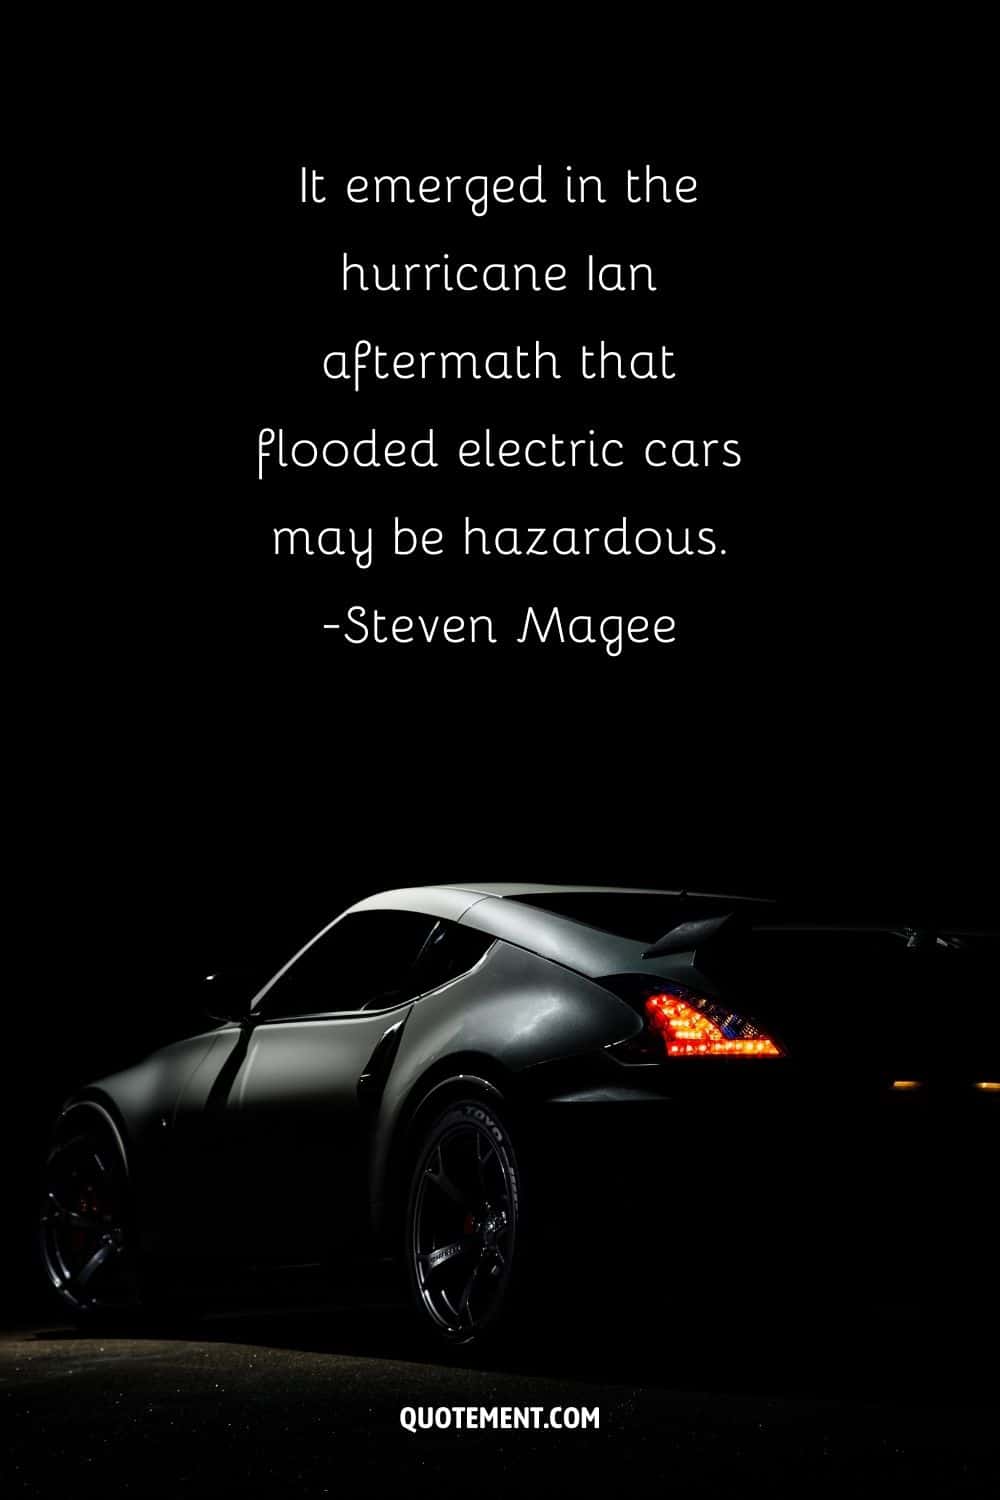 “It emerged in the hurricane Ian aftermath that flooded electric cars may be hazardous.” ― Steven Magee